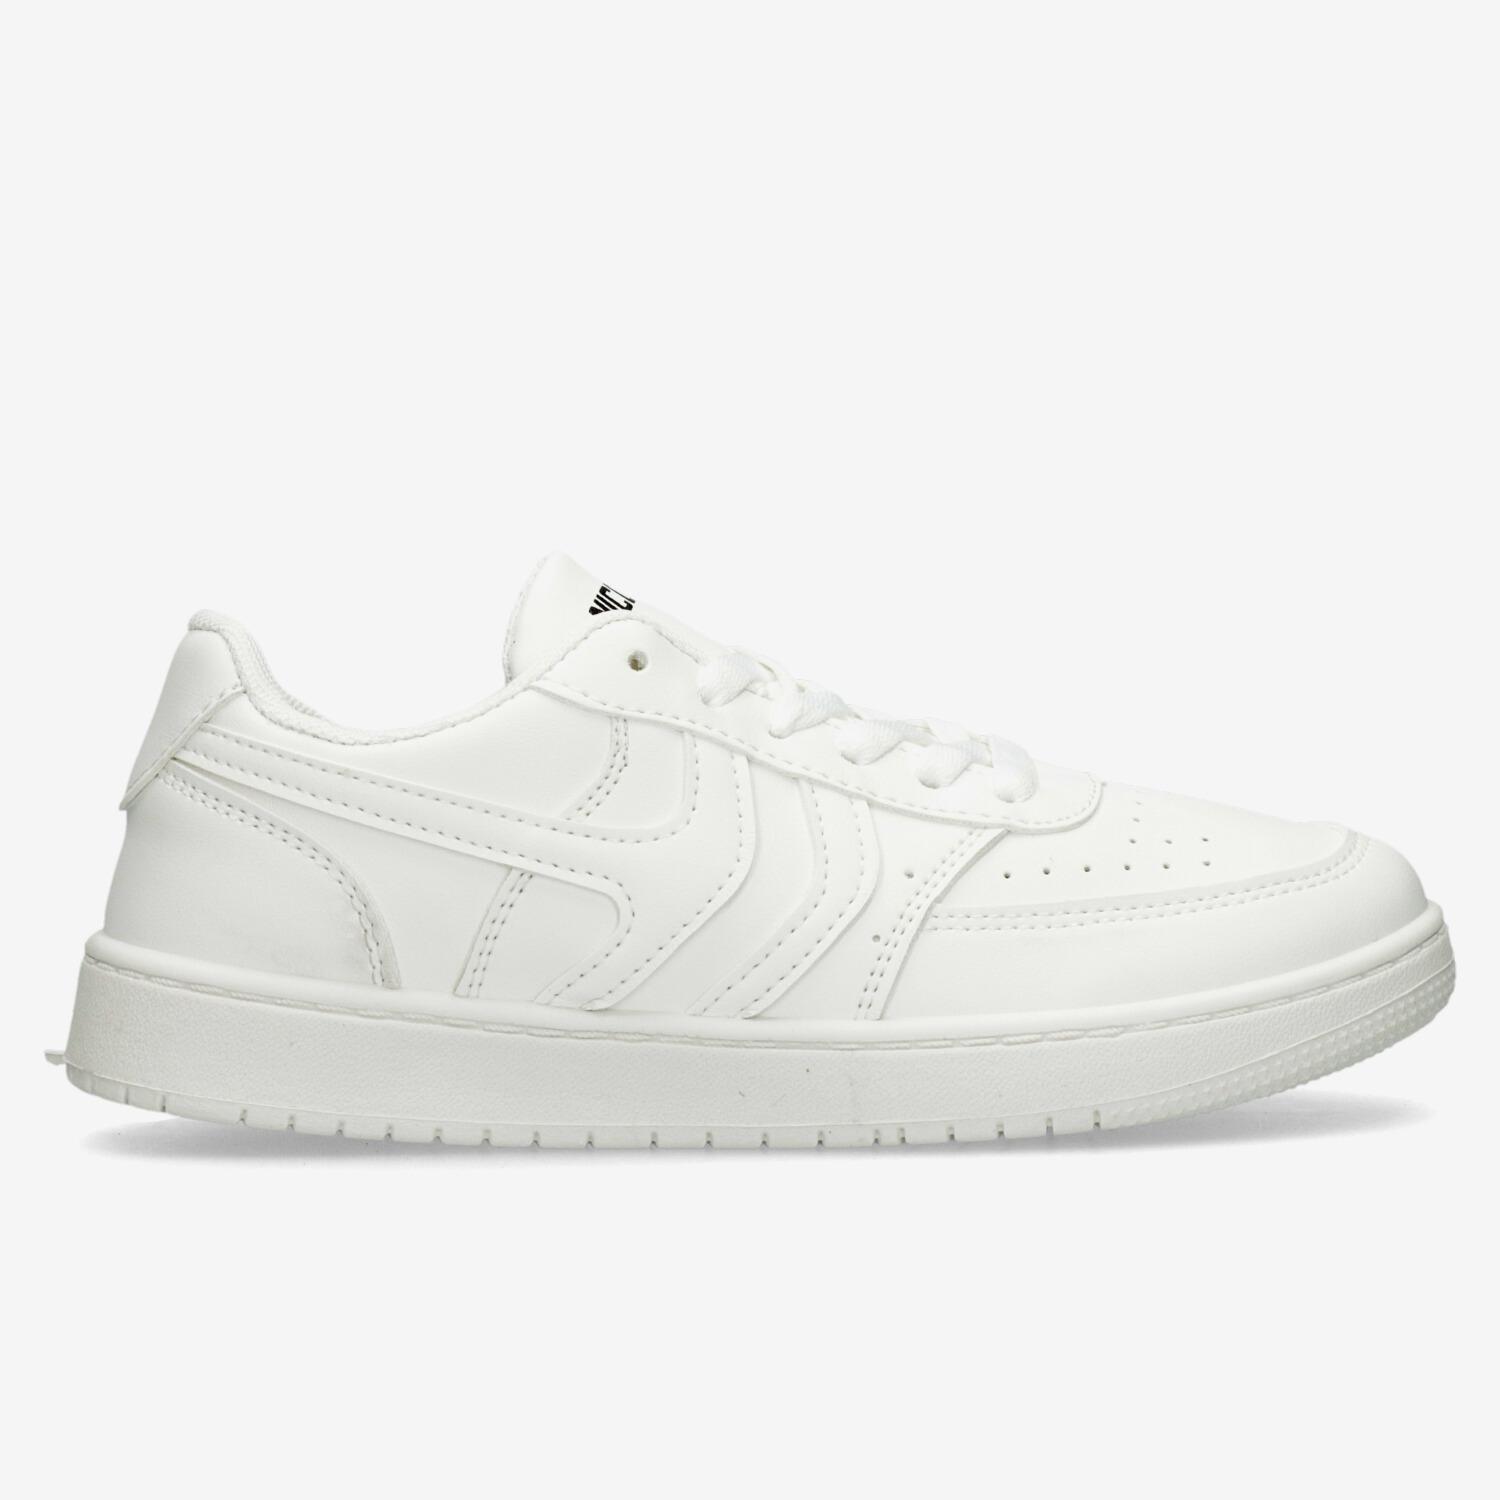 Nicoboco Sub-Blanc-Chaussures Femme sports taille 38